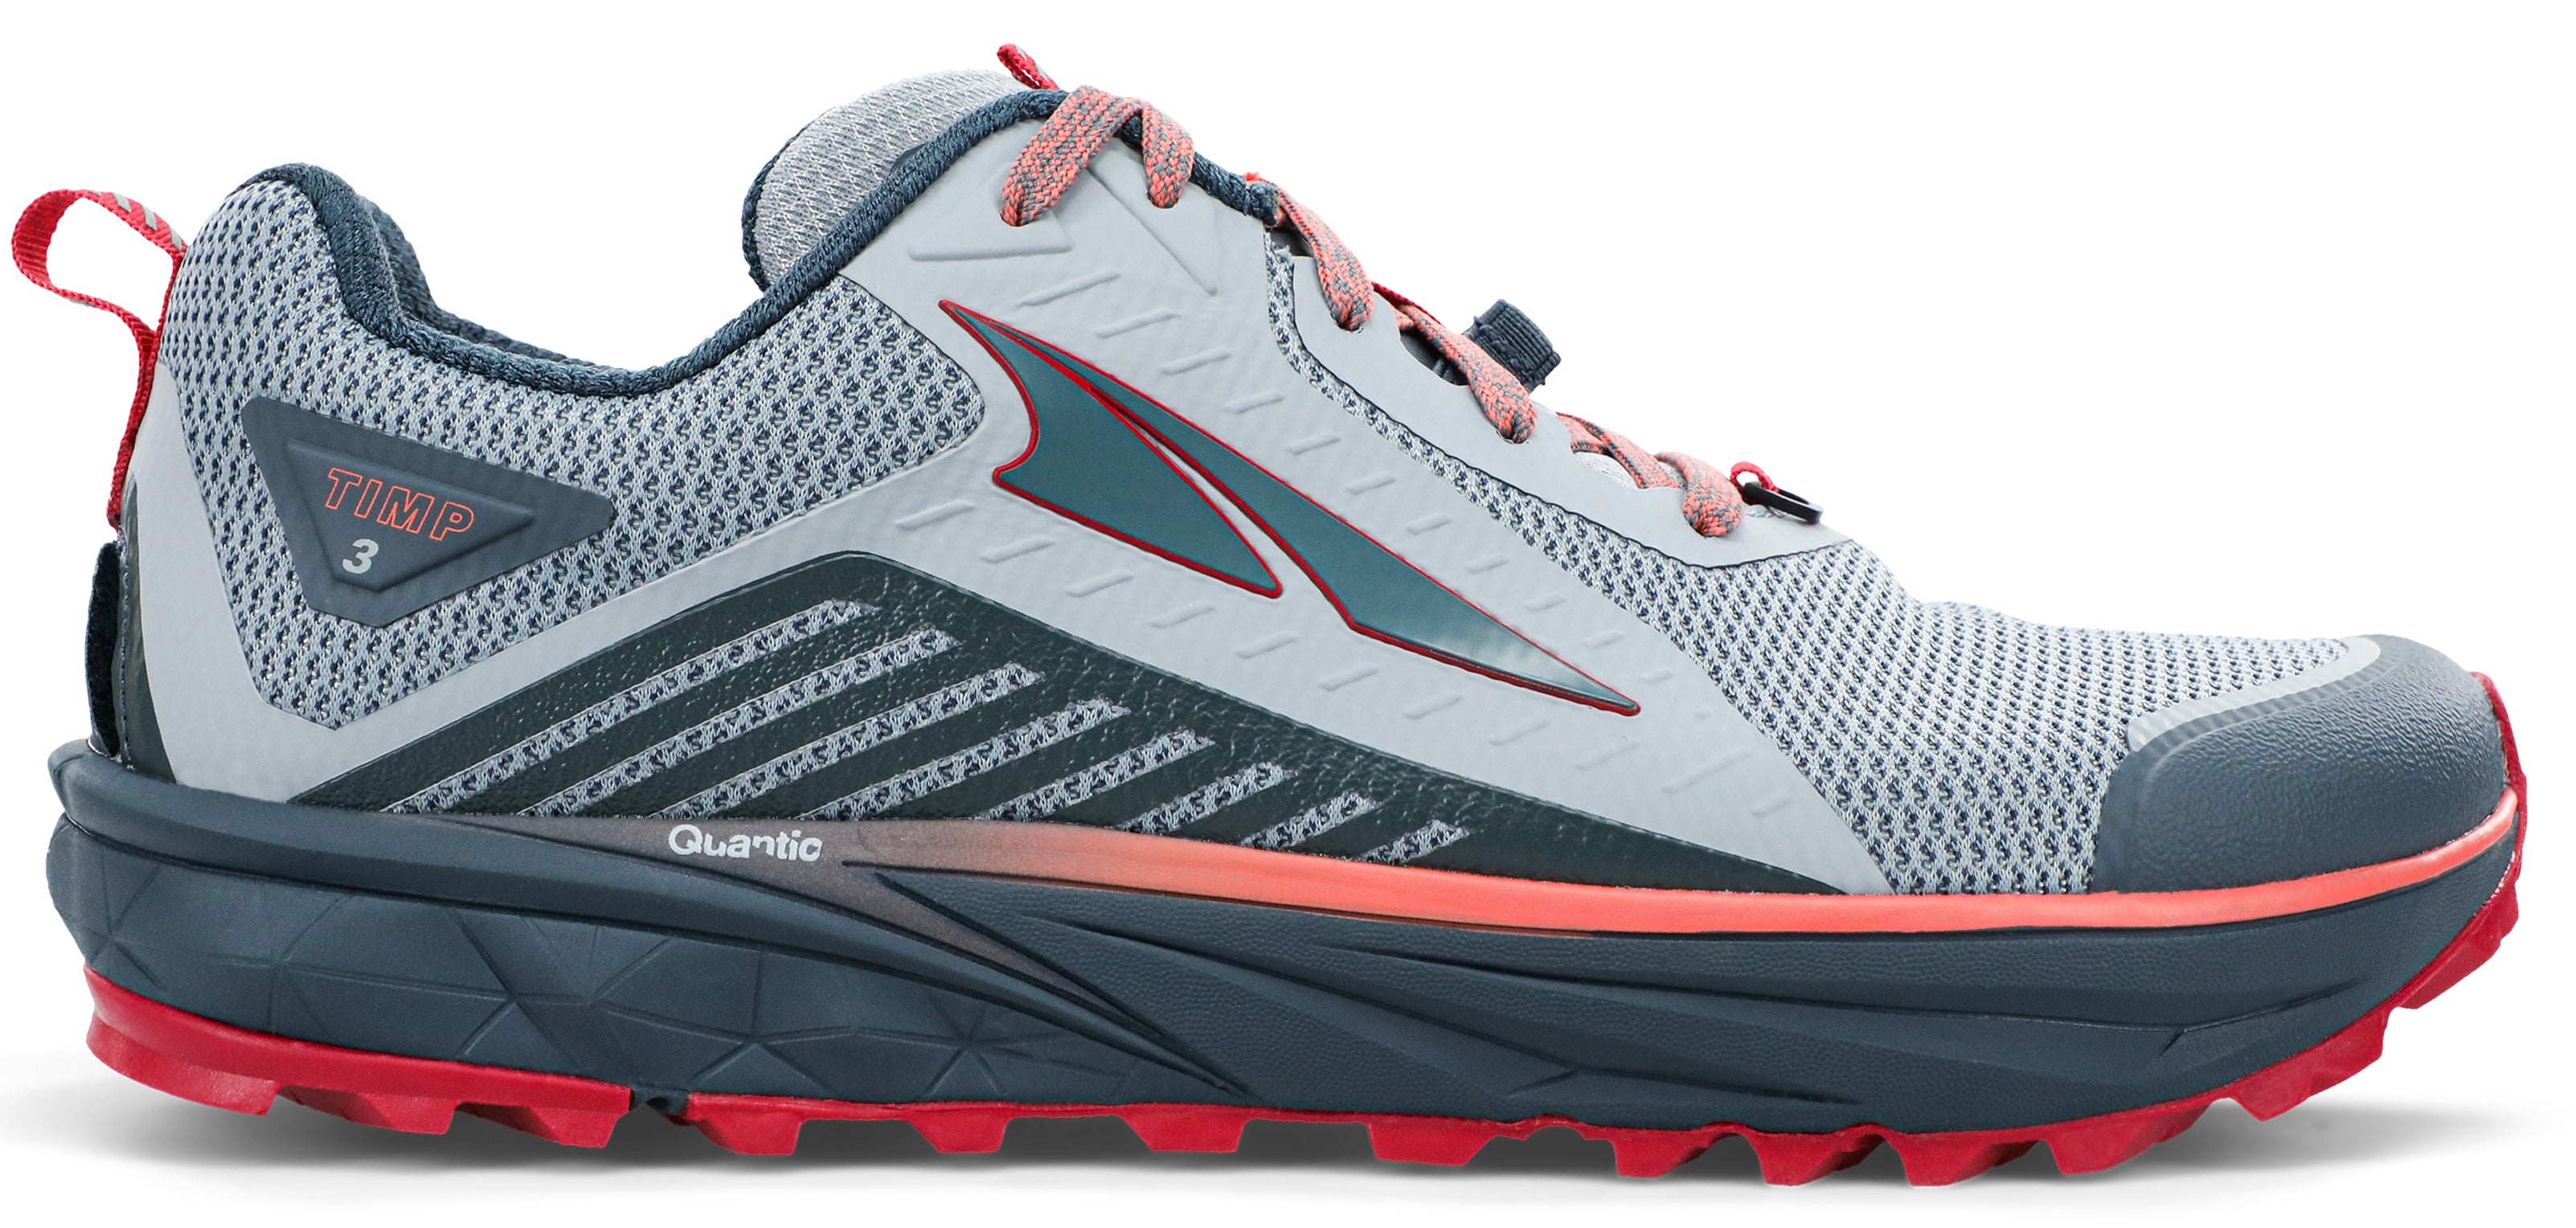 Women's Altra Timp 3 Trail Running Shoe in Gray/Pink from the side